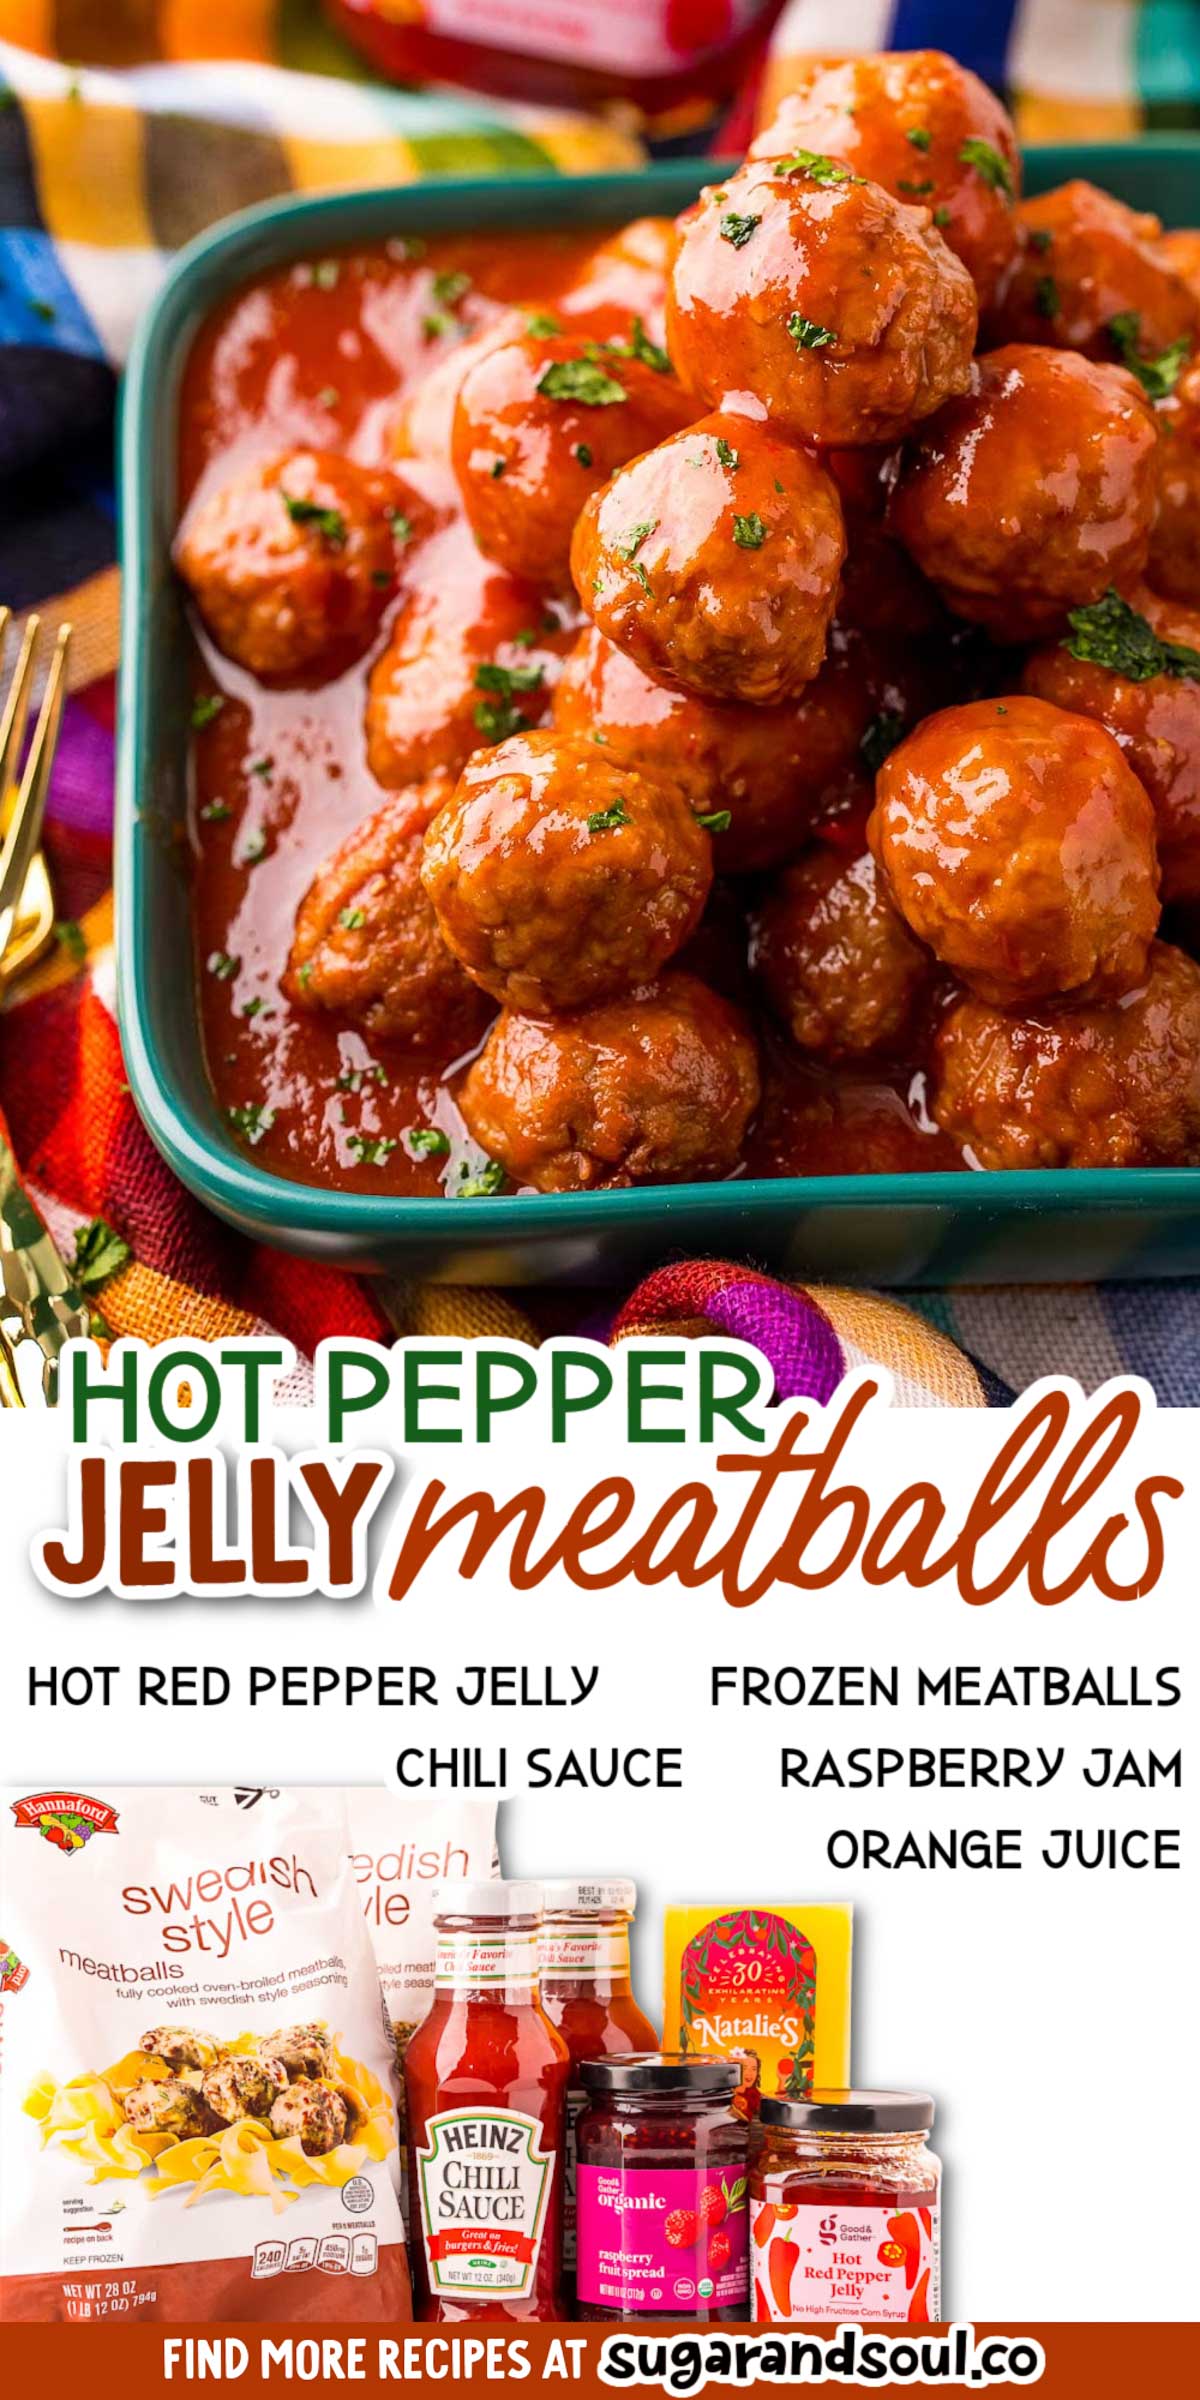 Hot Pepper Jelly Meatballs turns frozen meatballs and 4 other simple ingredients into a sweet and spicy appetizer that friends and family will love! Simply toss the ingredients into the crockpot and your work is done! via @sugarandsoulco